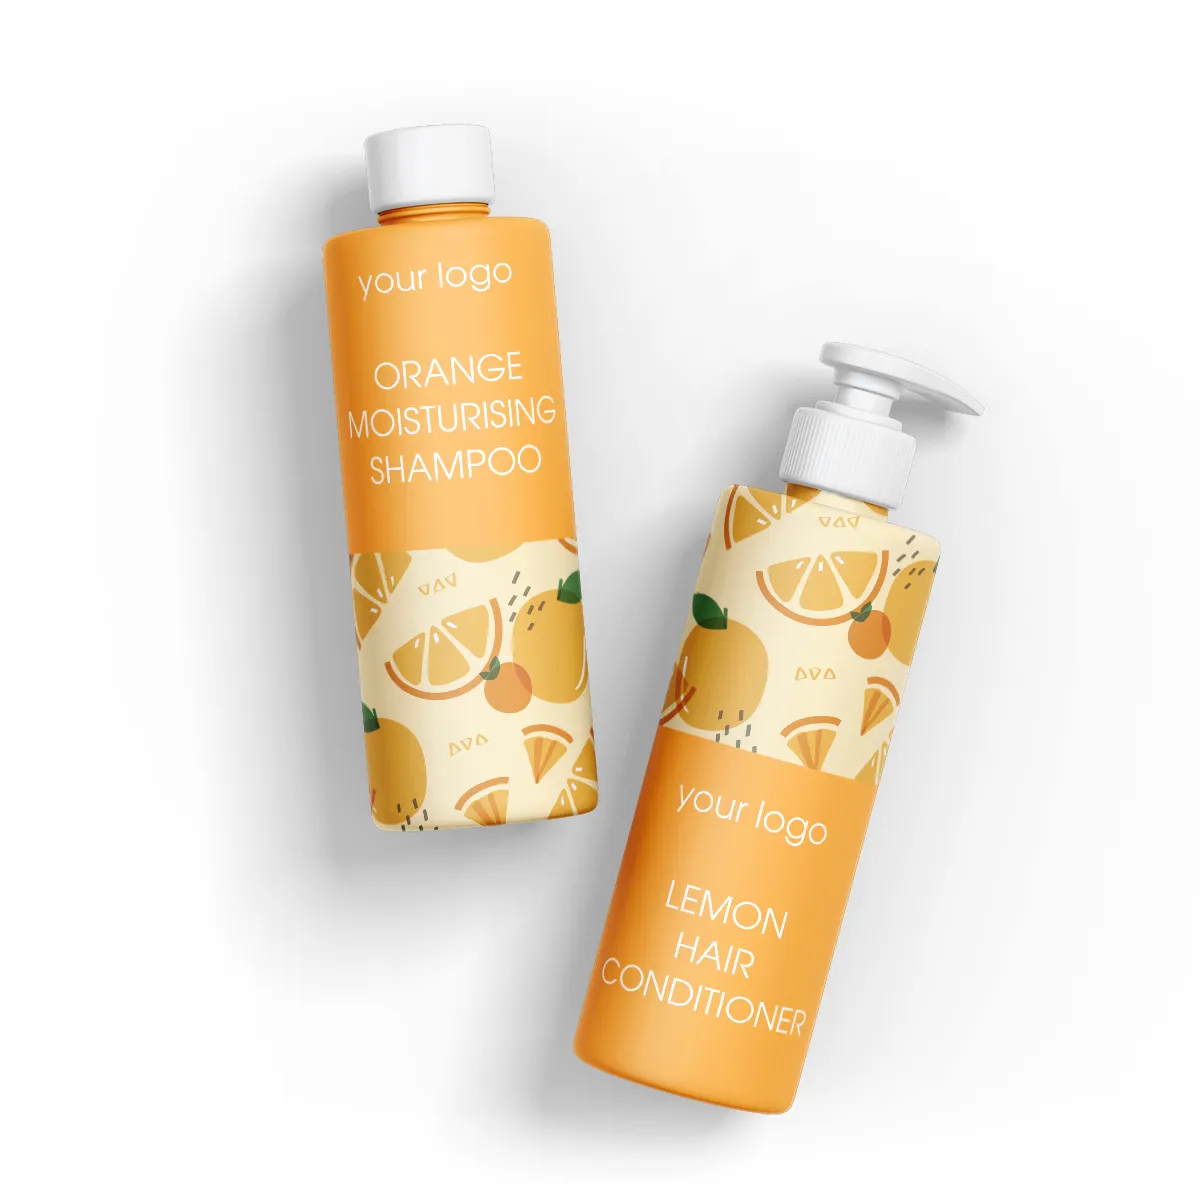 Private Label Made In Italy Organic Hair Shampoo With Orange And Sunflower Oil All Natural Ingredients.